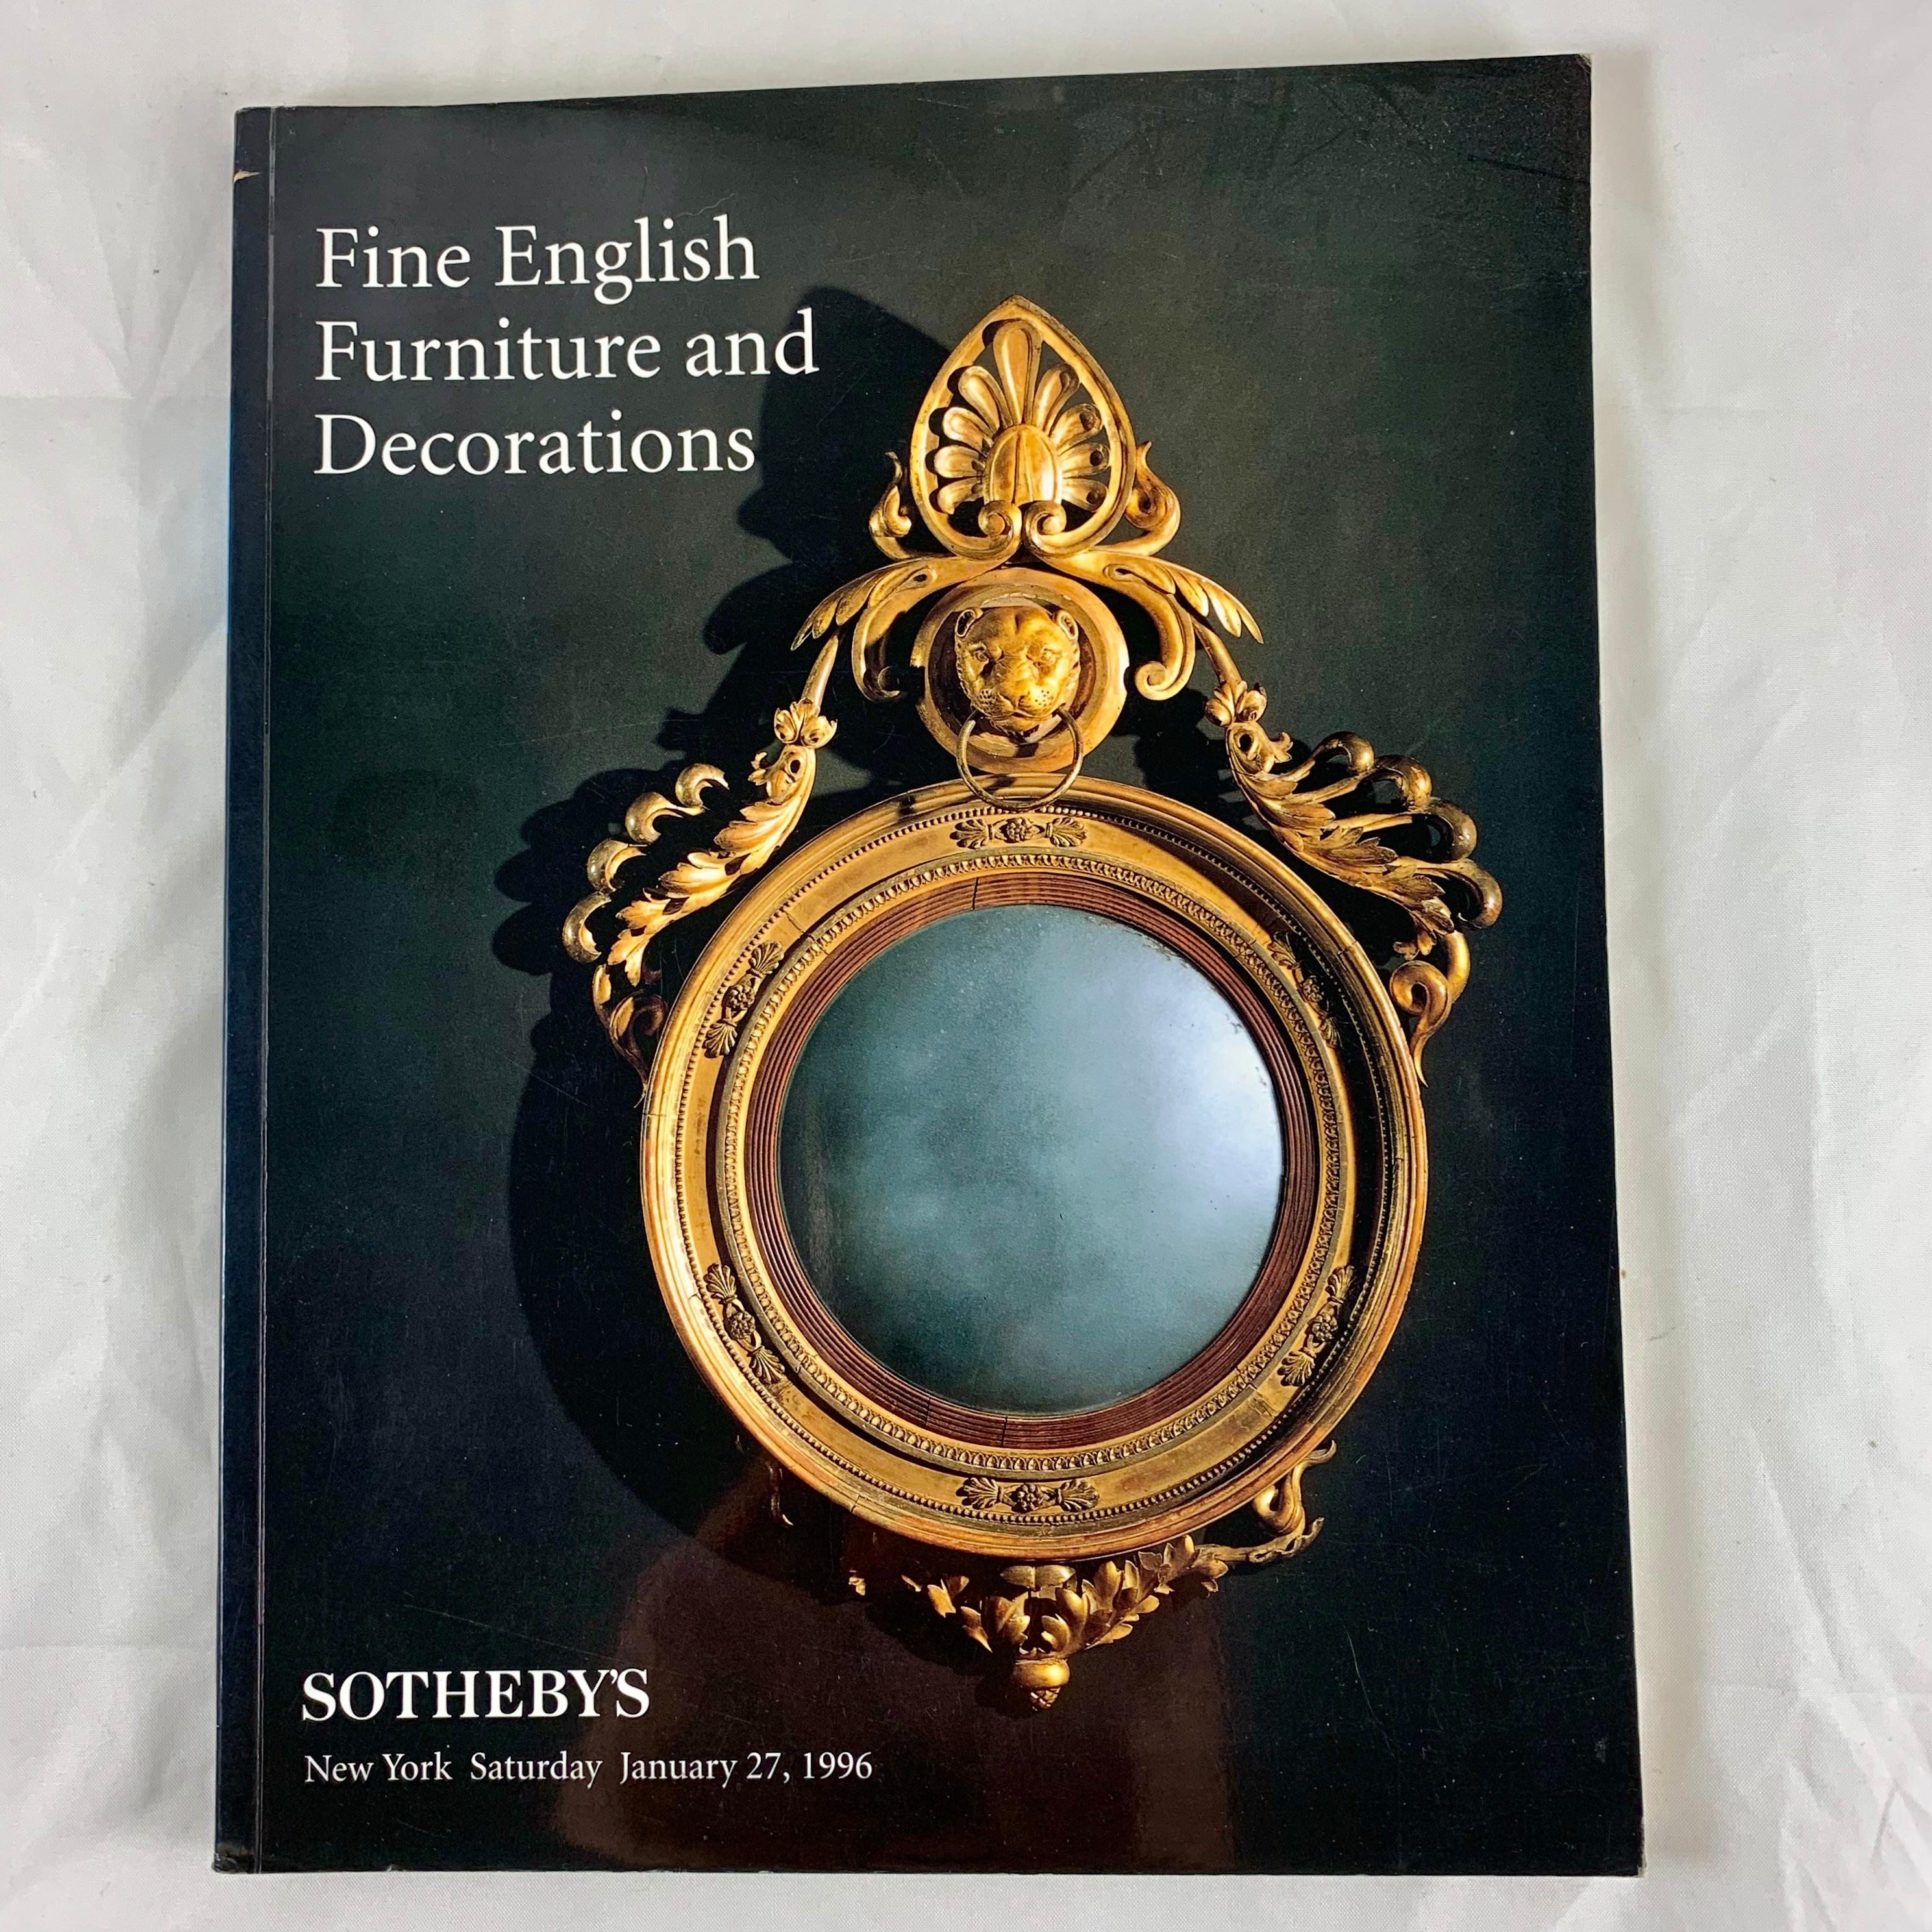 International Style Sotheby's NY Auction Catalogues, Fine English Furniture & Decorations, Set of 2